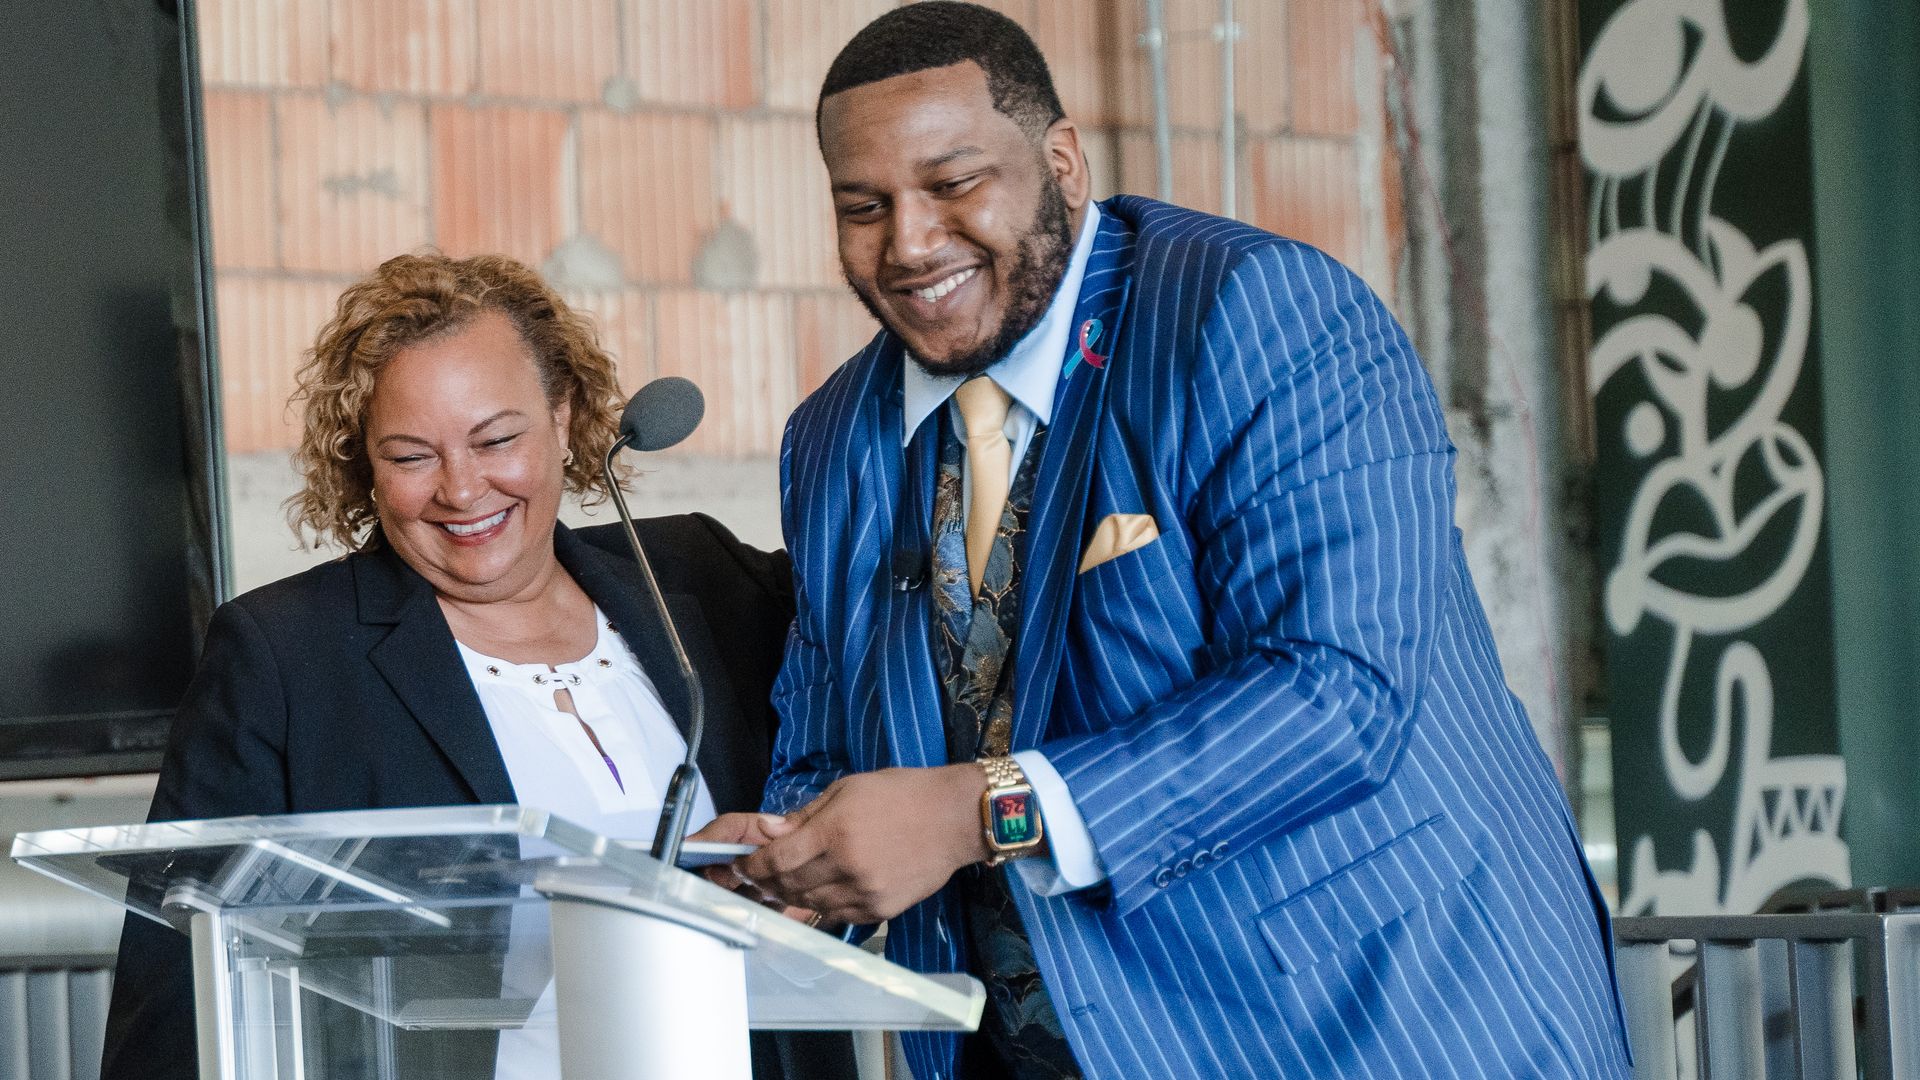 Detroit native and graduate Mario Crippen (right) pictured beside Lisa Jackson, Apple’s VP of environment, policy and social initiatives. Photo courtesy of Apple